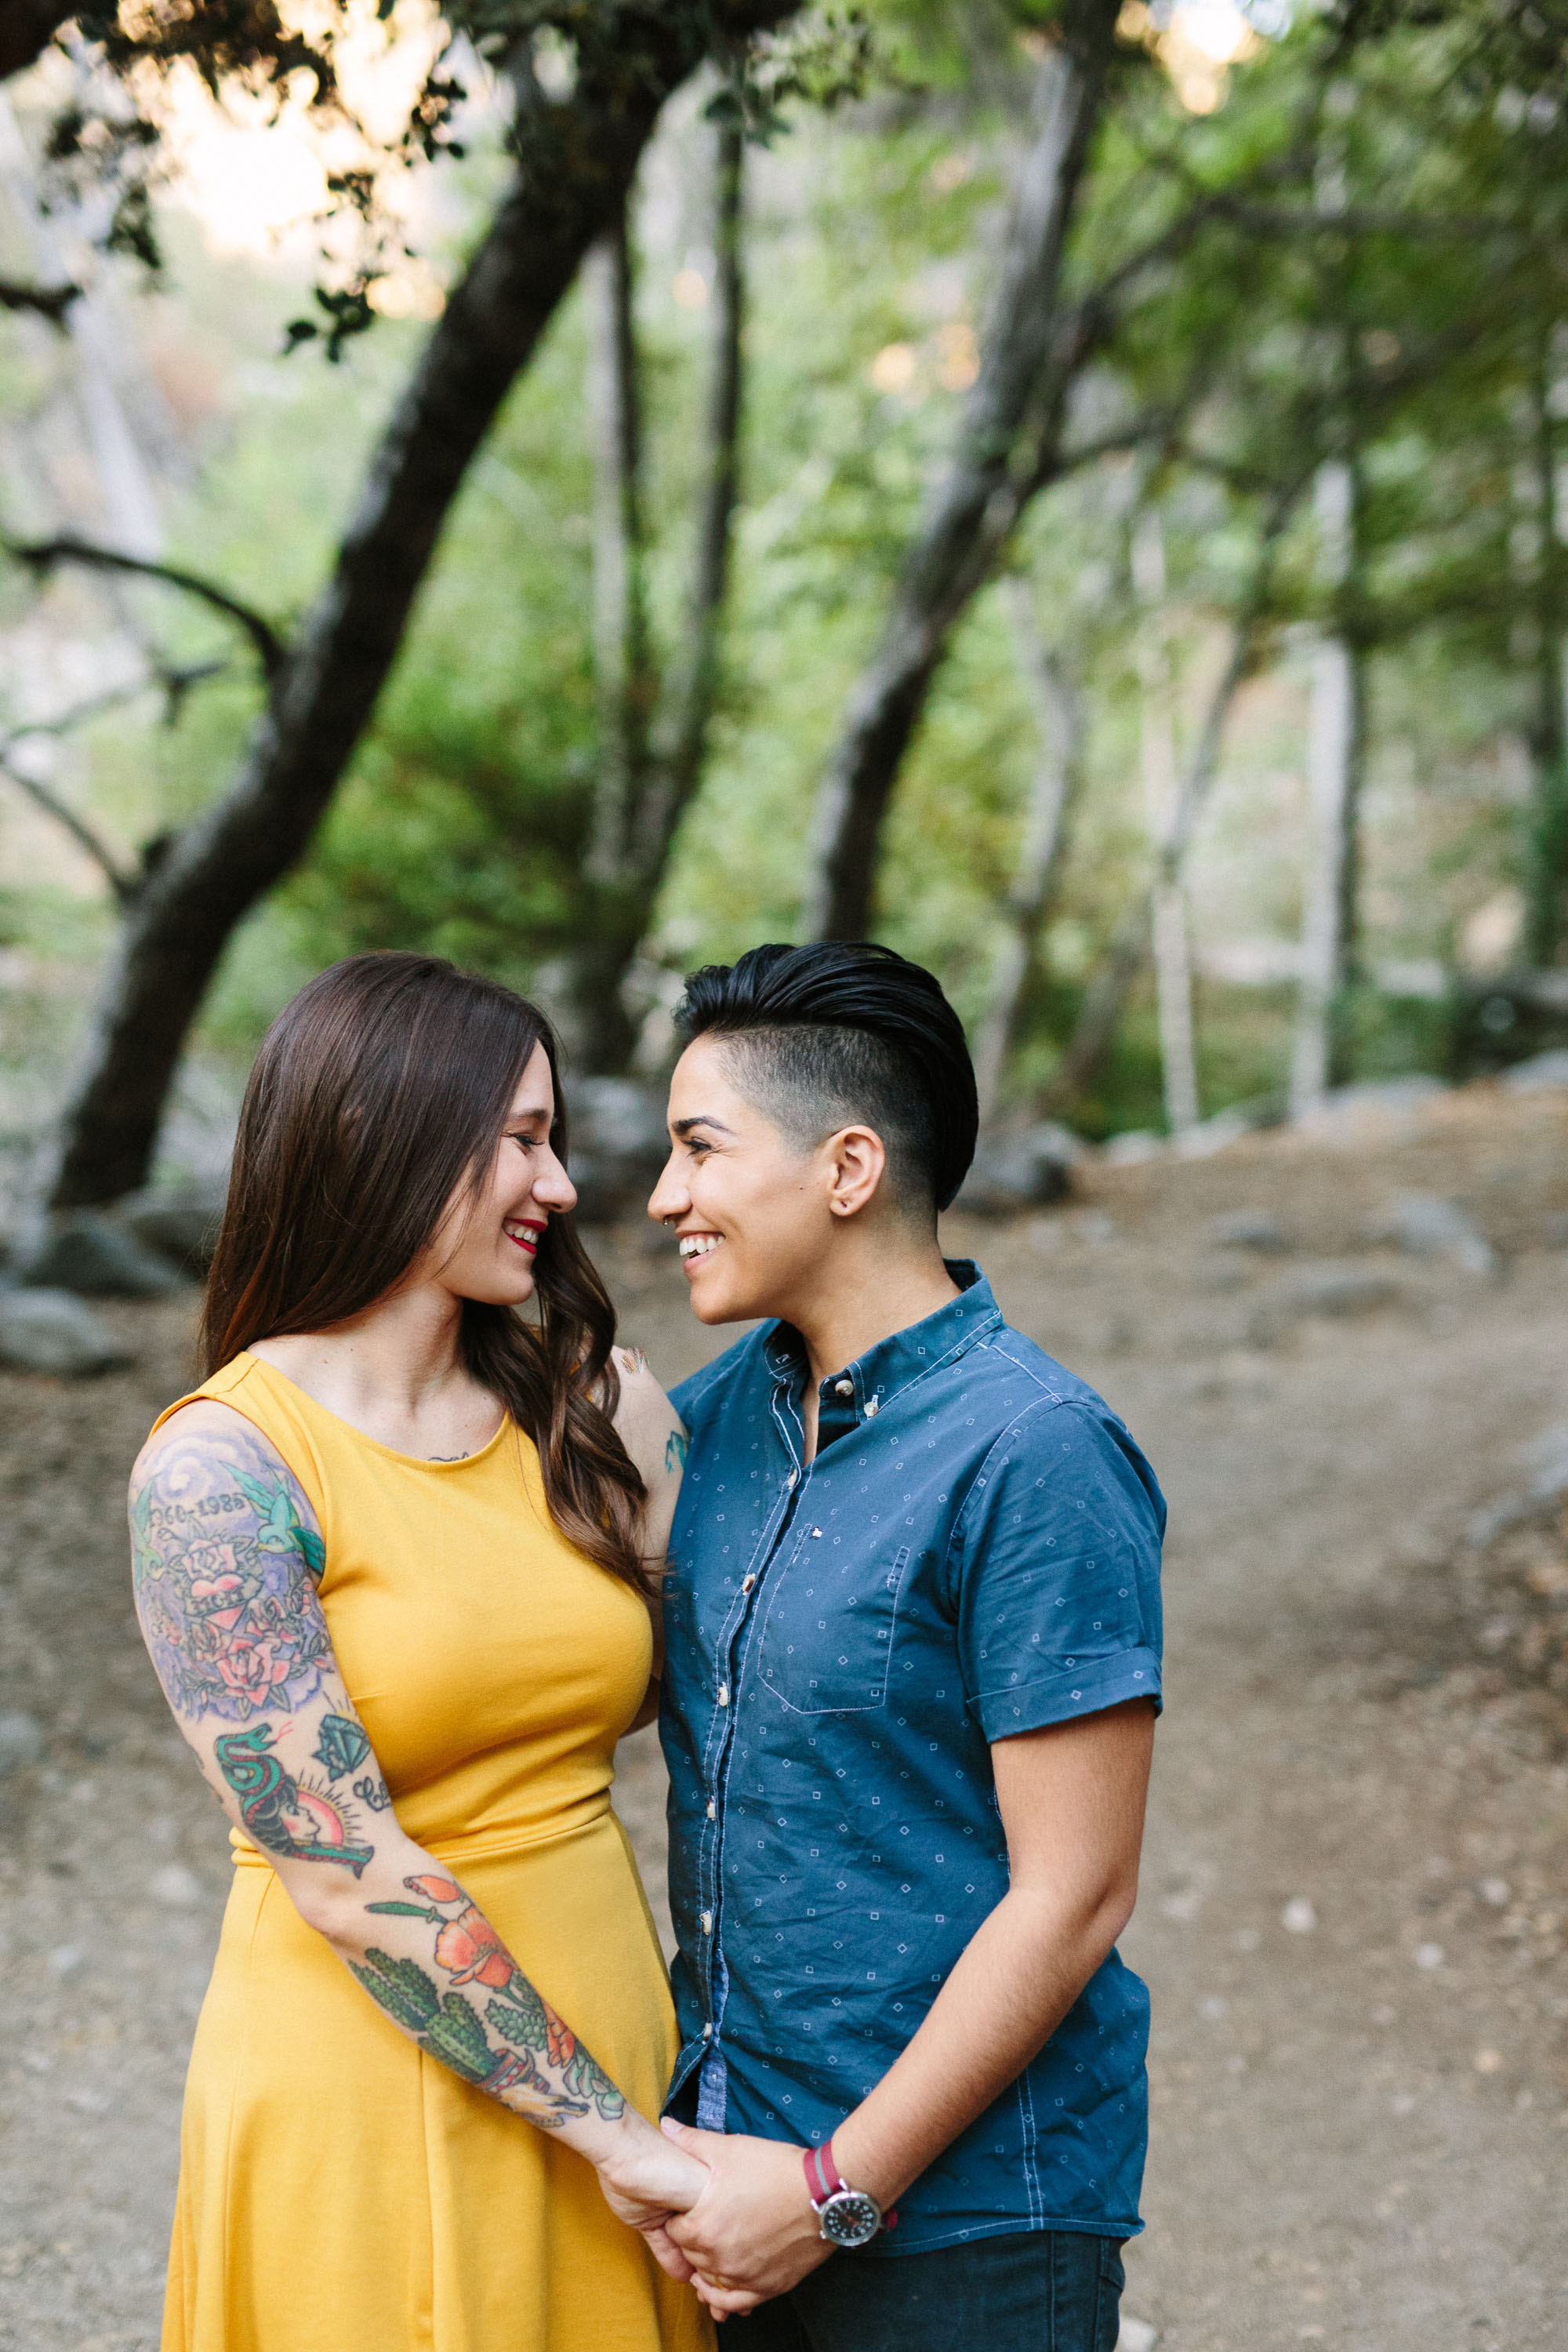 www-marycostaphotography-com-angeles-national-forest-engagement-0015